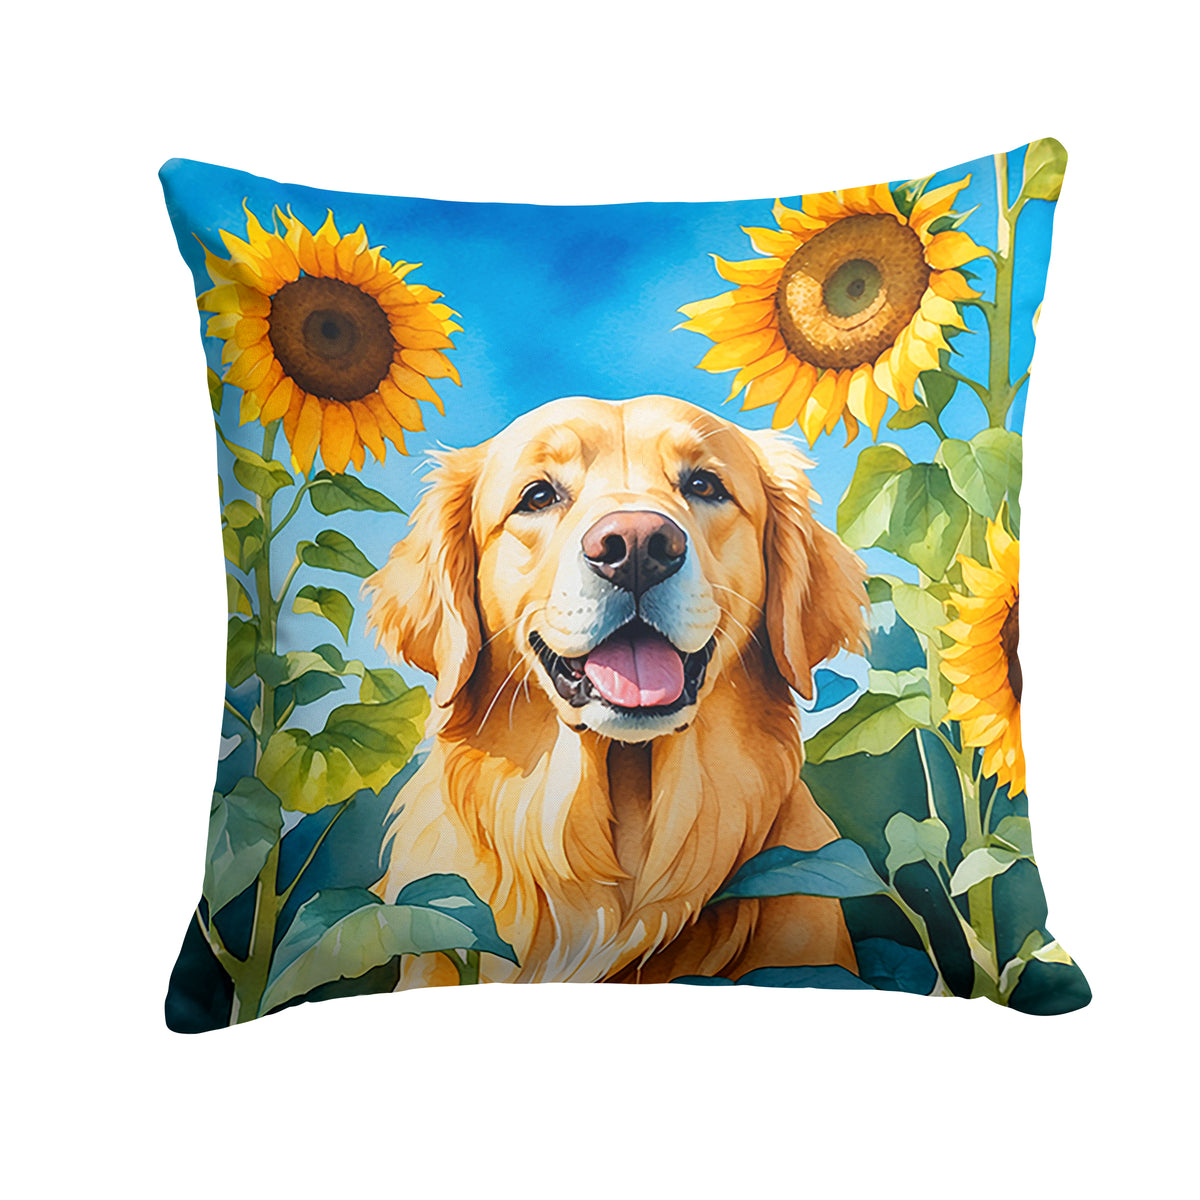 Buy this Golden Retriever in Sunflowers Throw Pillow